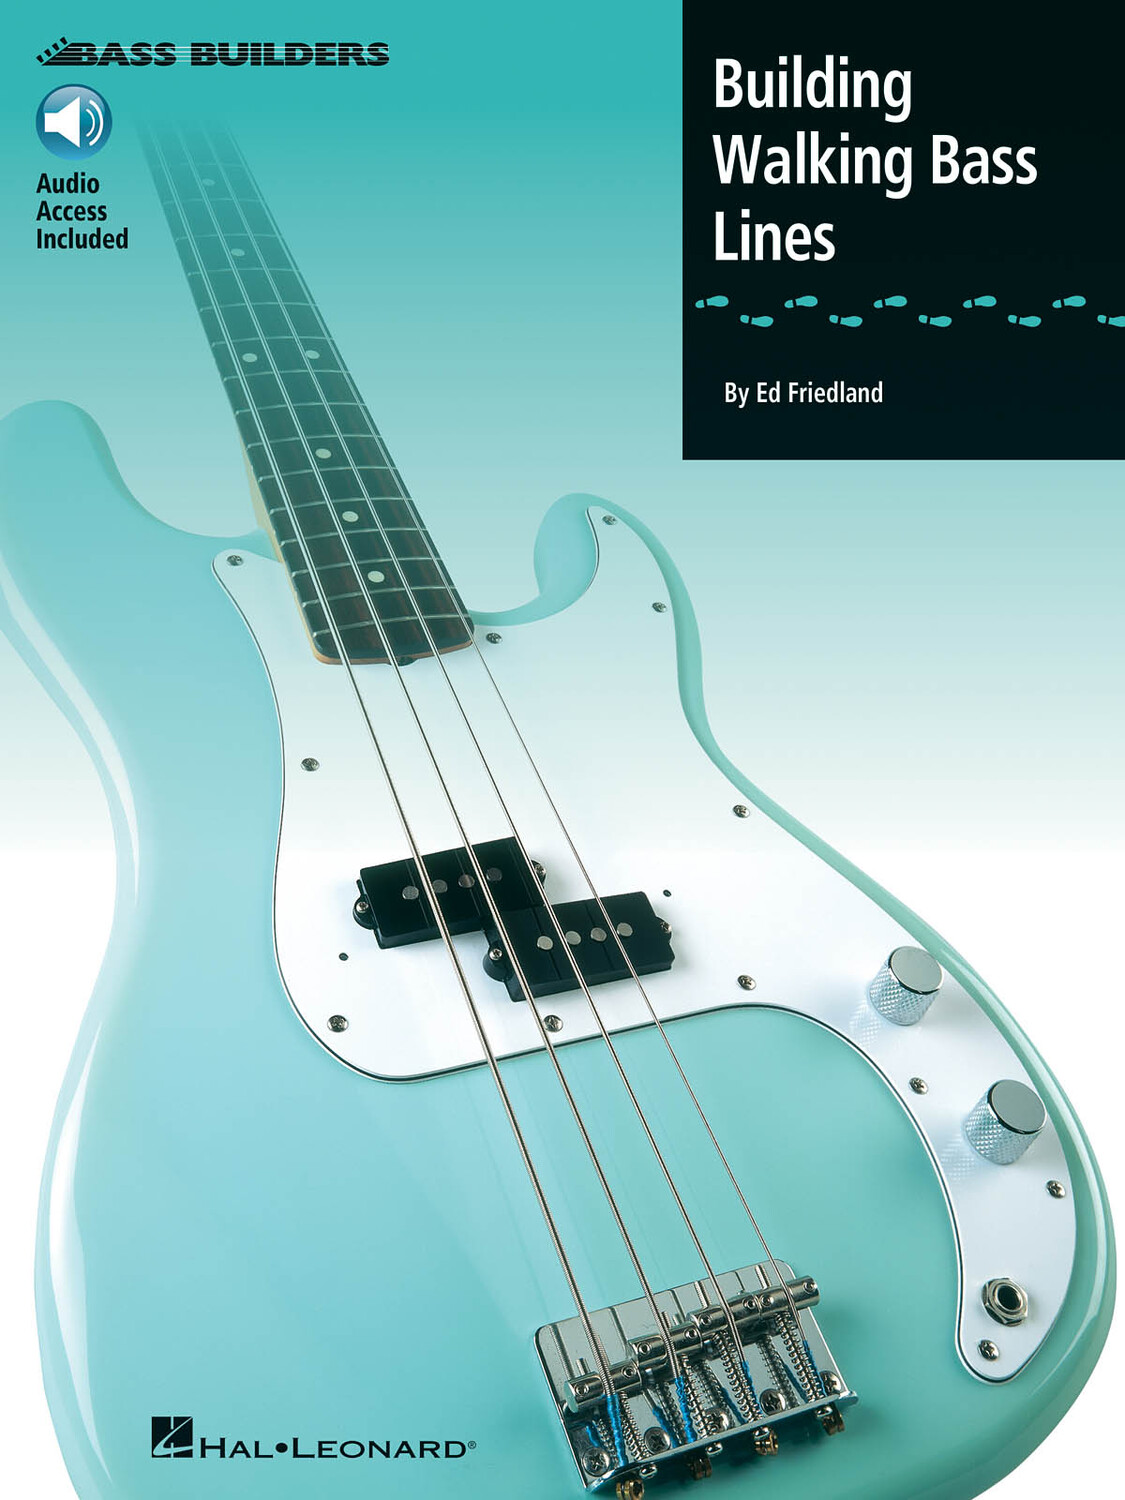 Cover: 73999950083 | Building Walking Bass Lines | Ed Friedland | Bass Builders